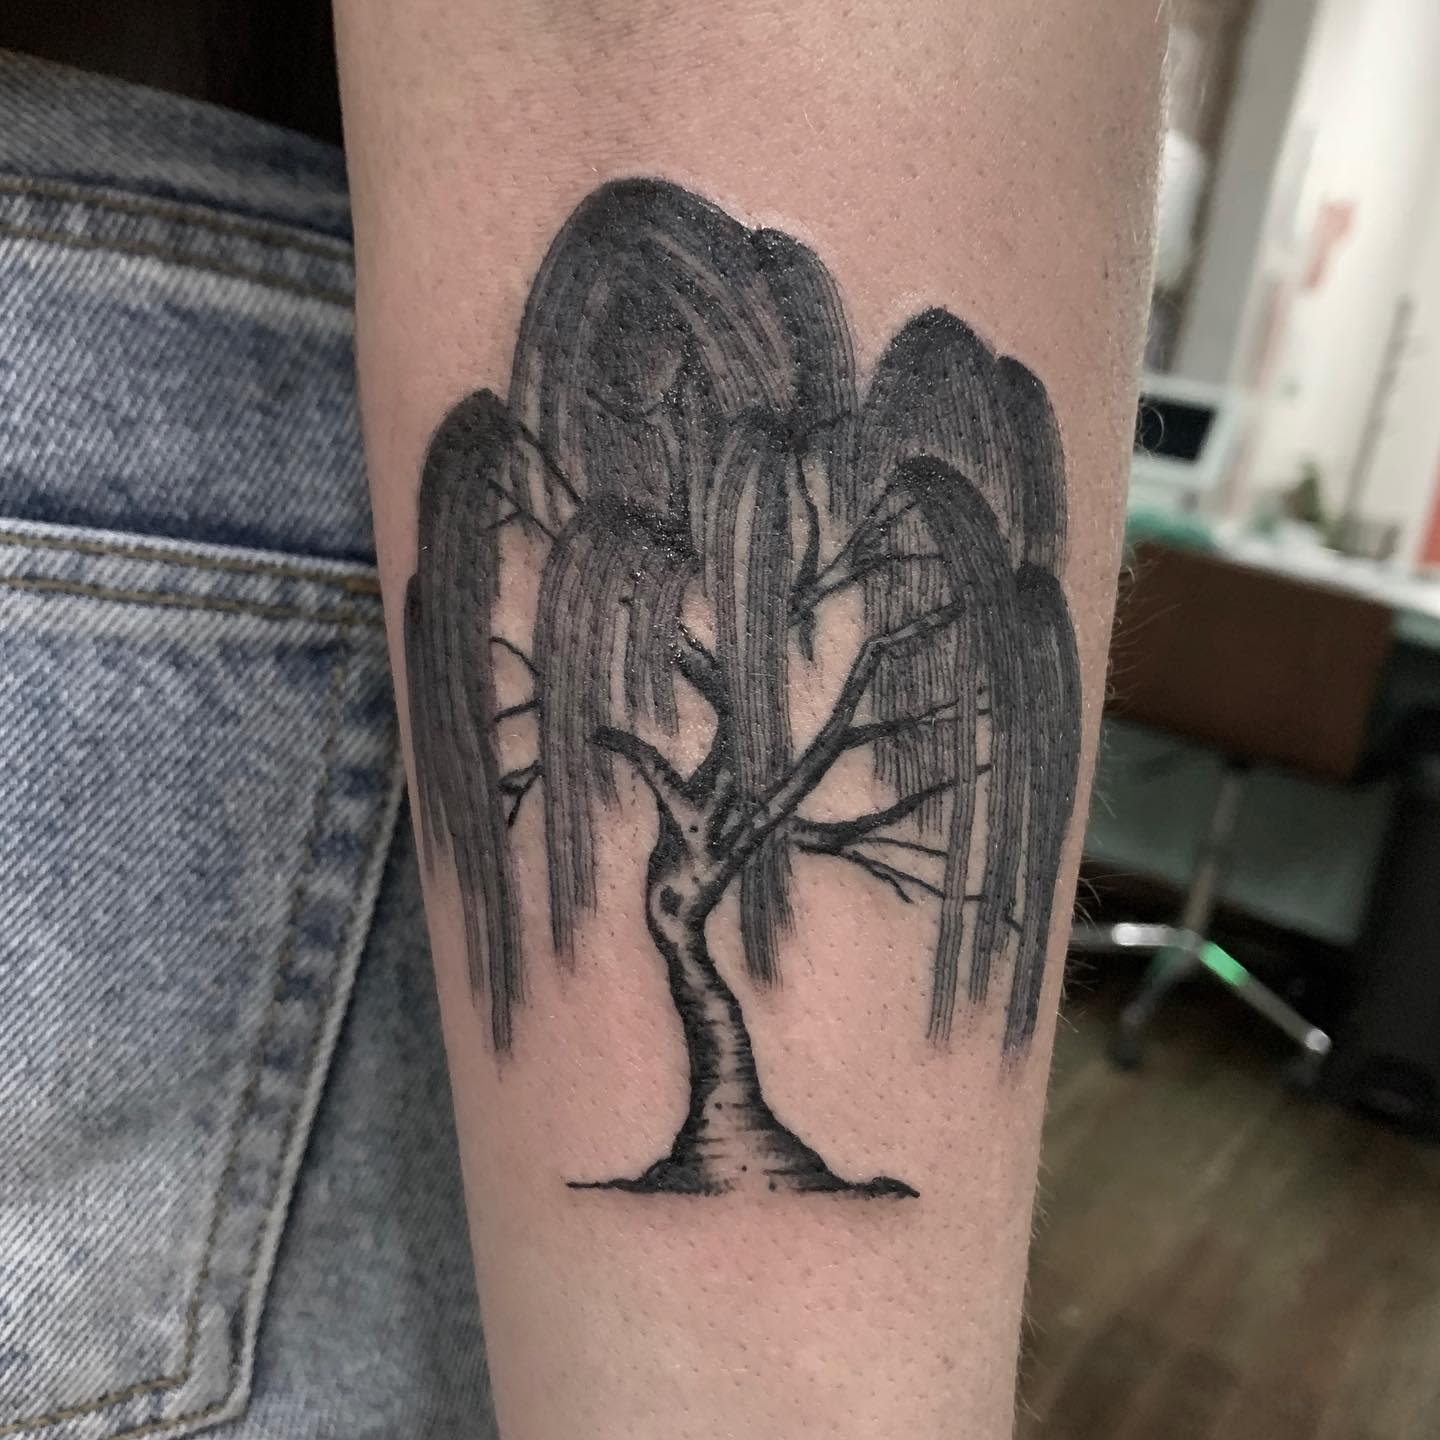 Traditional or Neotrad Weeping Willow Tattoo -iandwcampbell